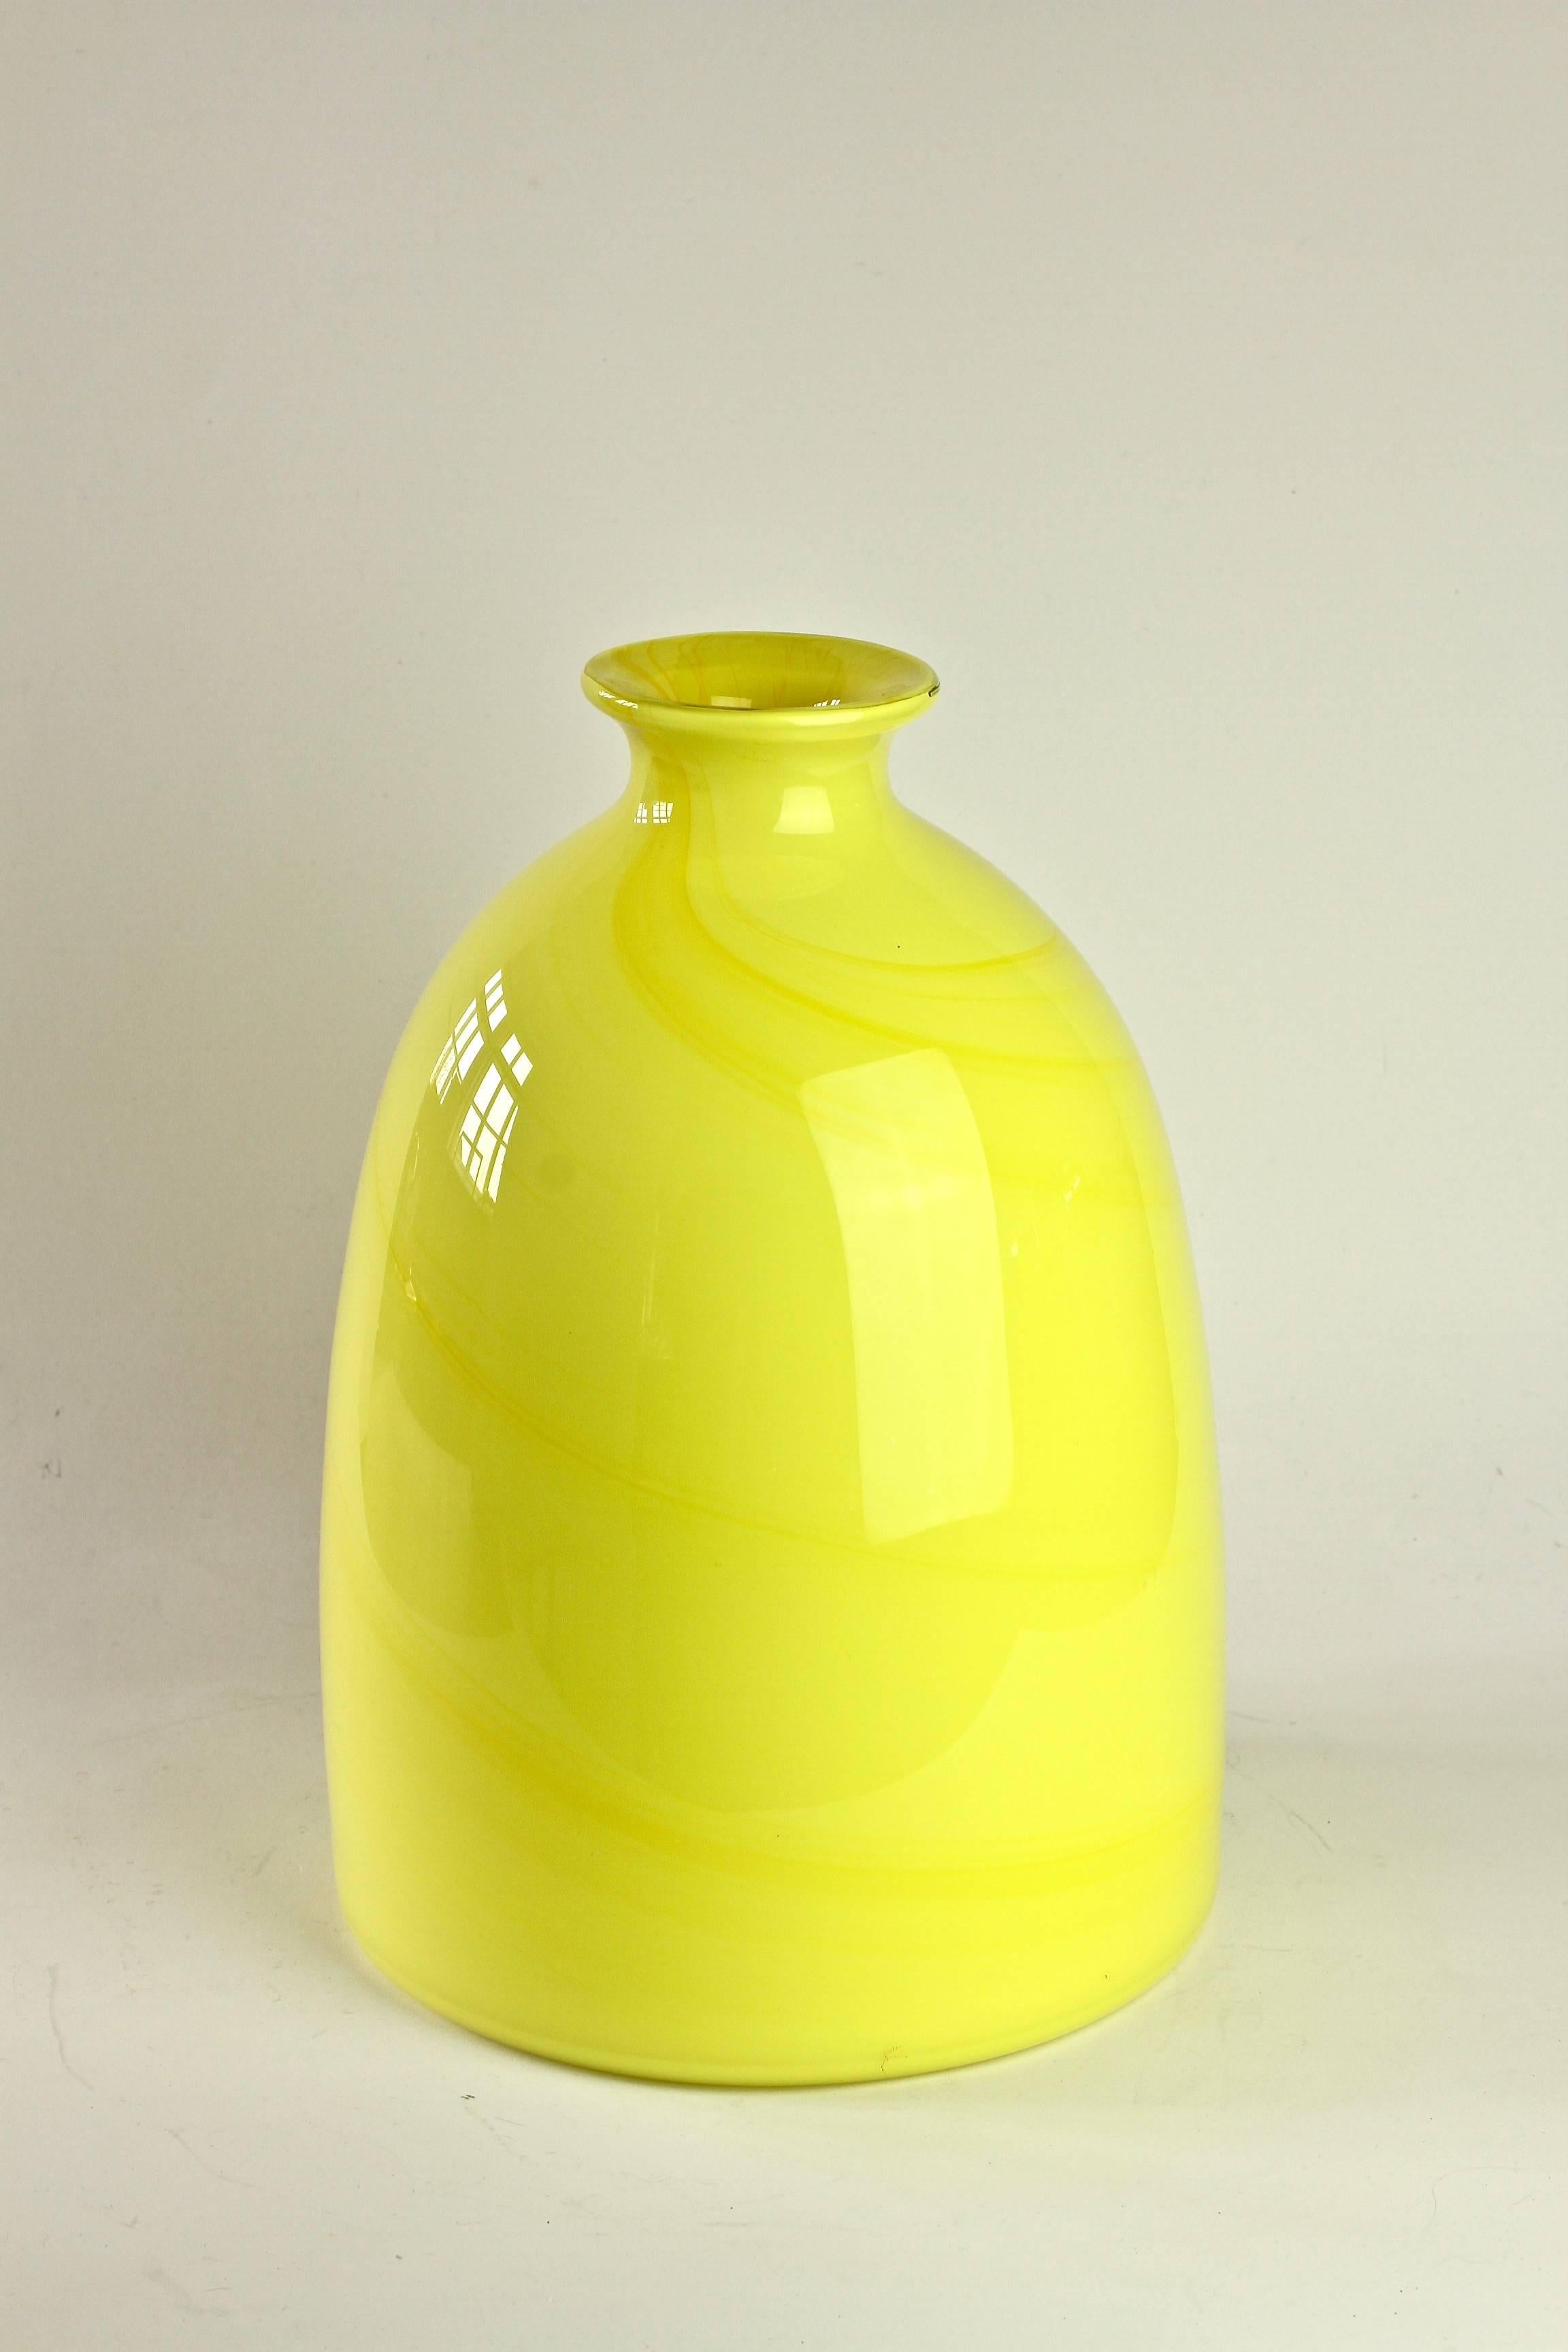 Wonderfully colourful / colorful tall bright yellow vase by Cenedese Vetri of Murano, Italy. Particularly striking is the form - with it's flat base and narrow neck - it has all the characteristics of a piece of hand thrown pottery with the